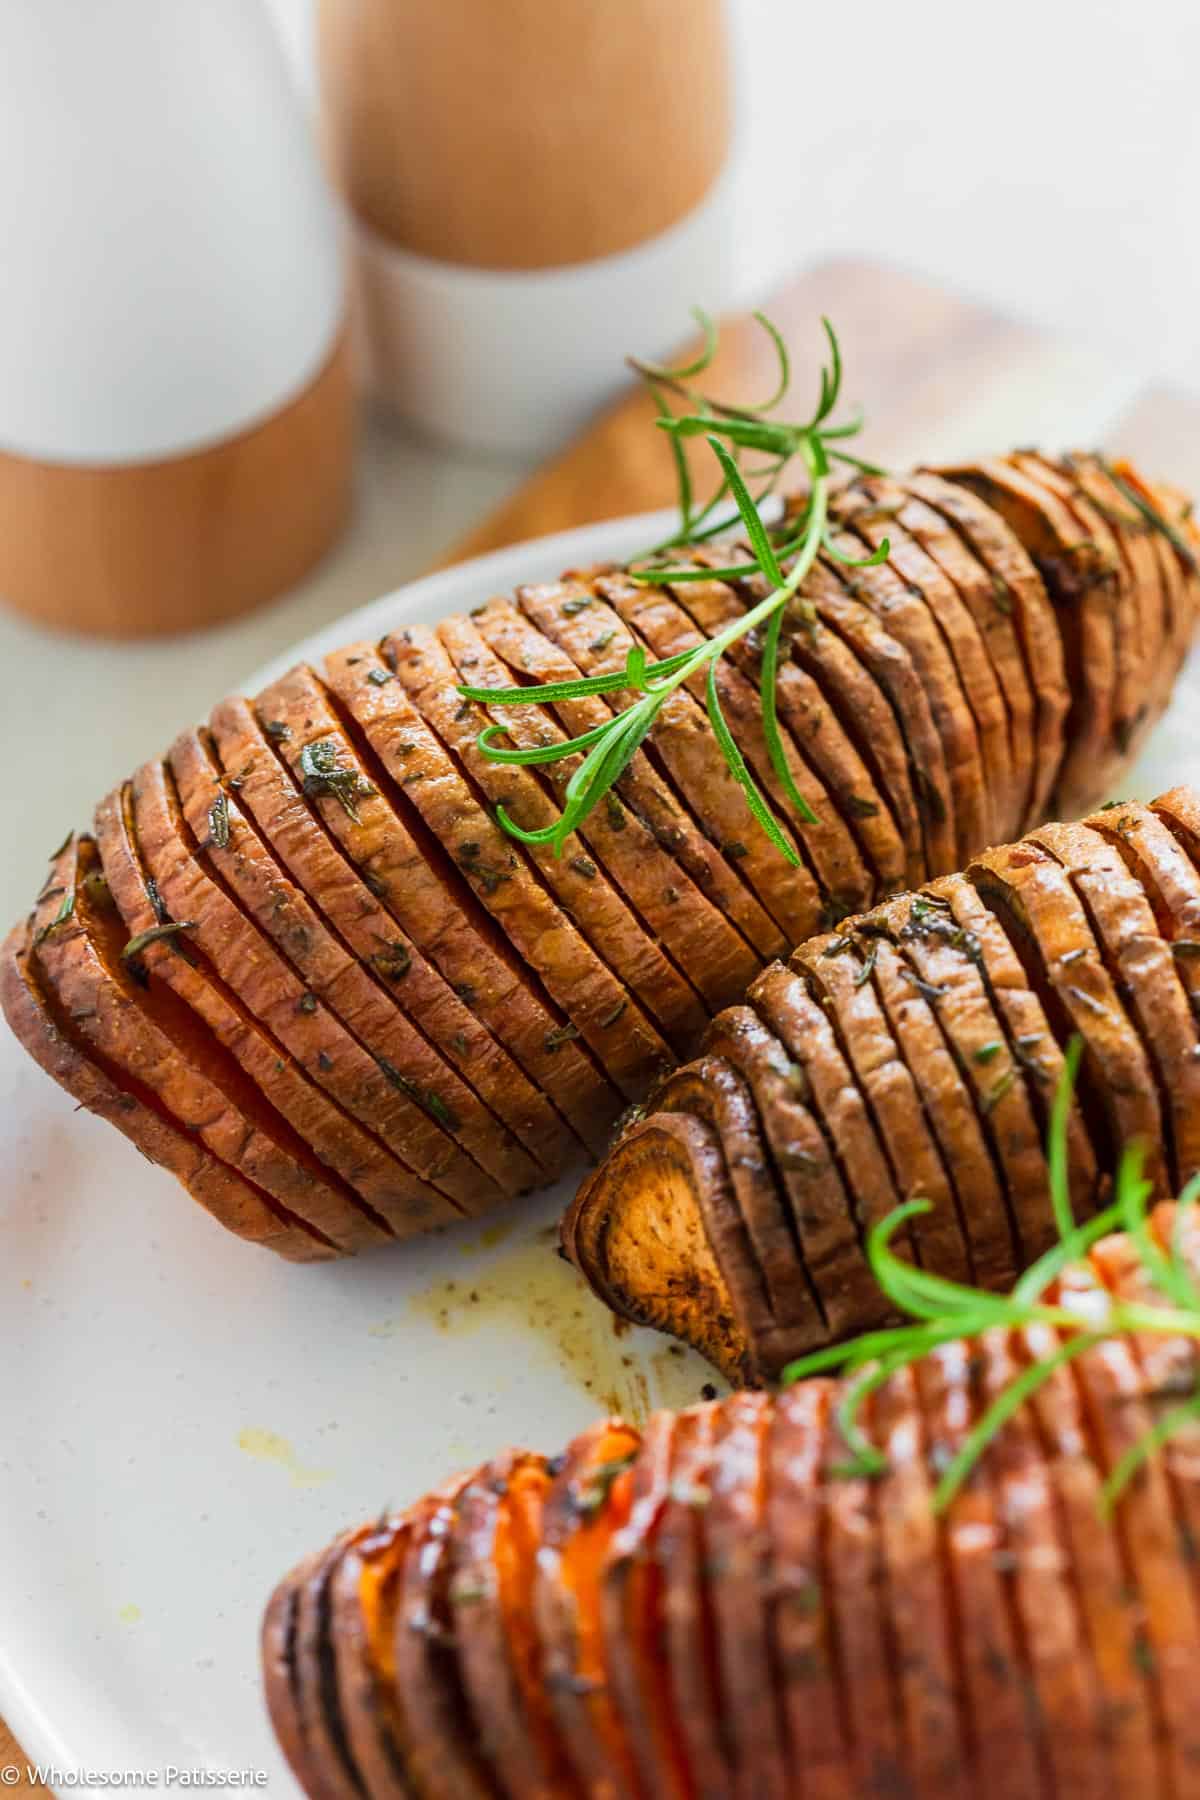 One sweet potato on plate next to more hasselback potatoes.